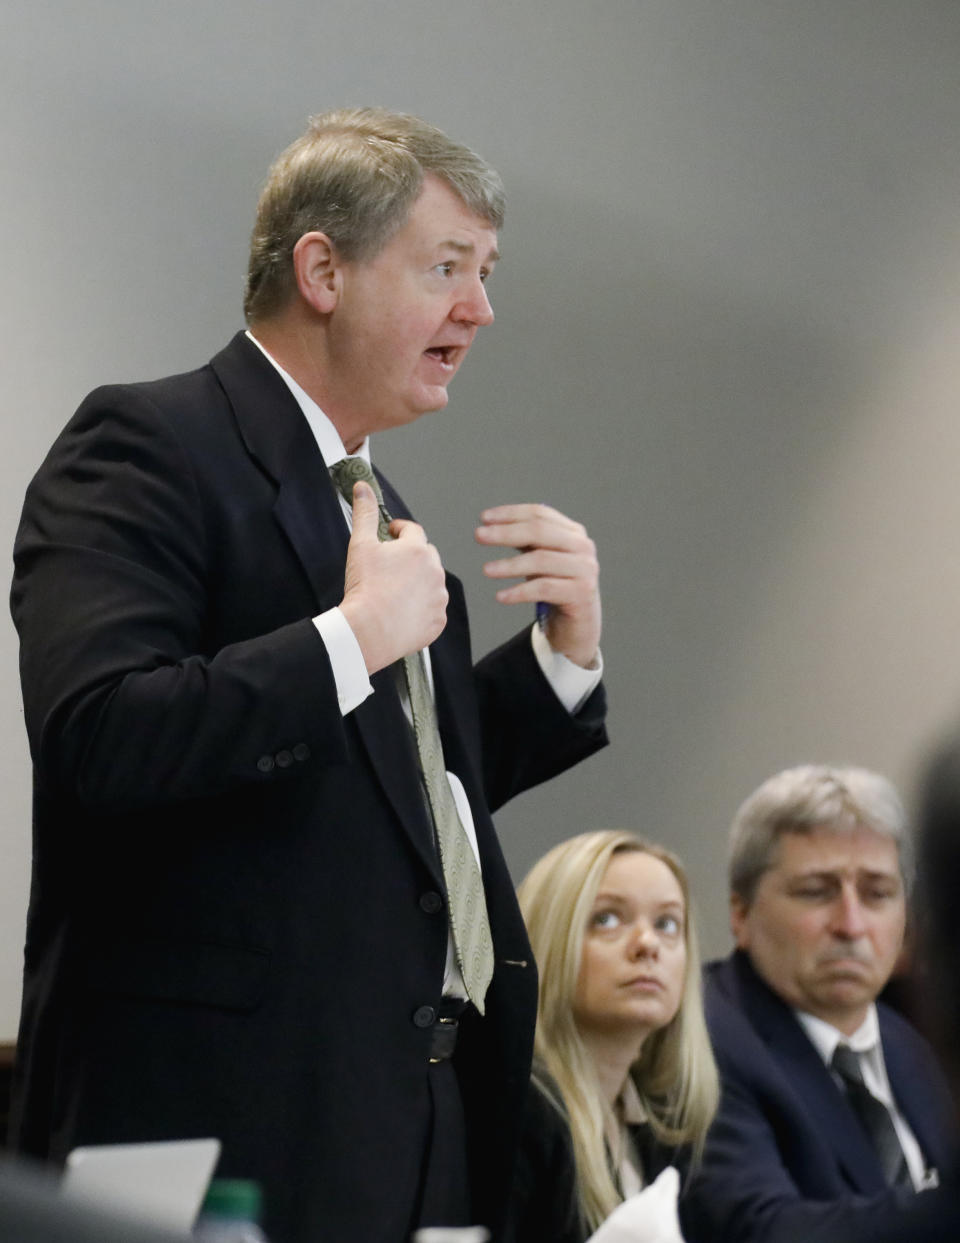 Defense attorney Kevin Gough speaks during the trial of Greg McMichael and his son, Travis McMichael, and a neighbor, William "Roddie" Bryan at the Glynn County Courthouse, Friday, Nov. 19, 2021, in Brunswick, Ga. The three are charged with the February 2020 slaying of 25-year-old Ahmaud Arbery. (Octavio Jones/Pool Photo via AP)